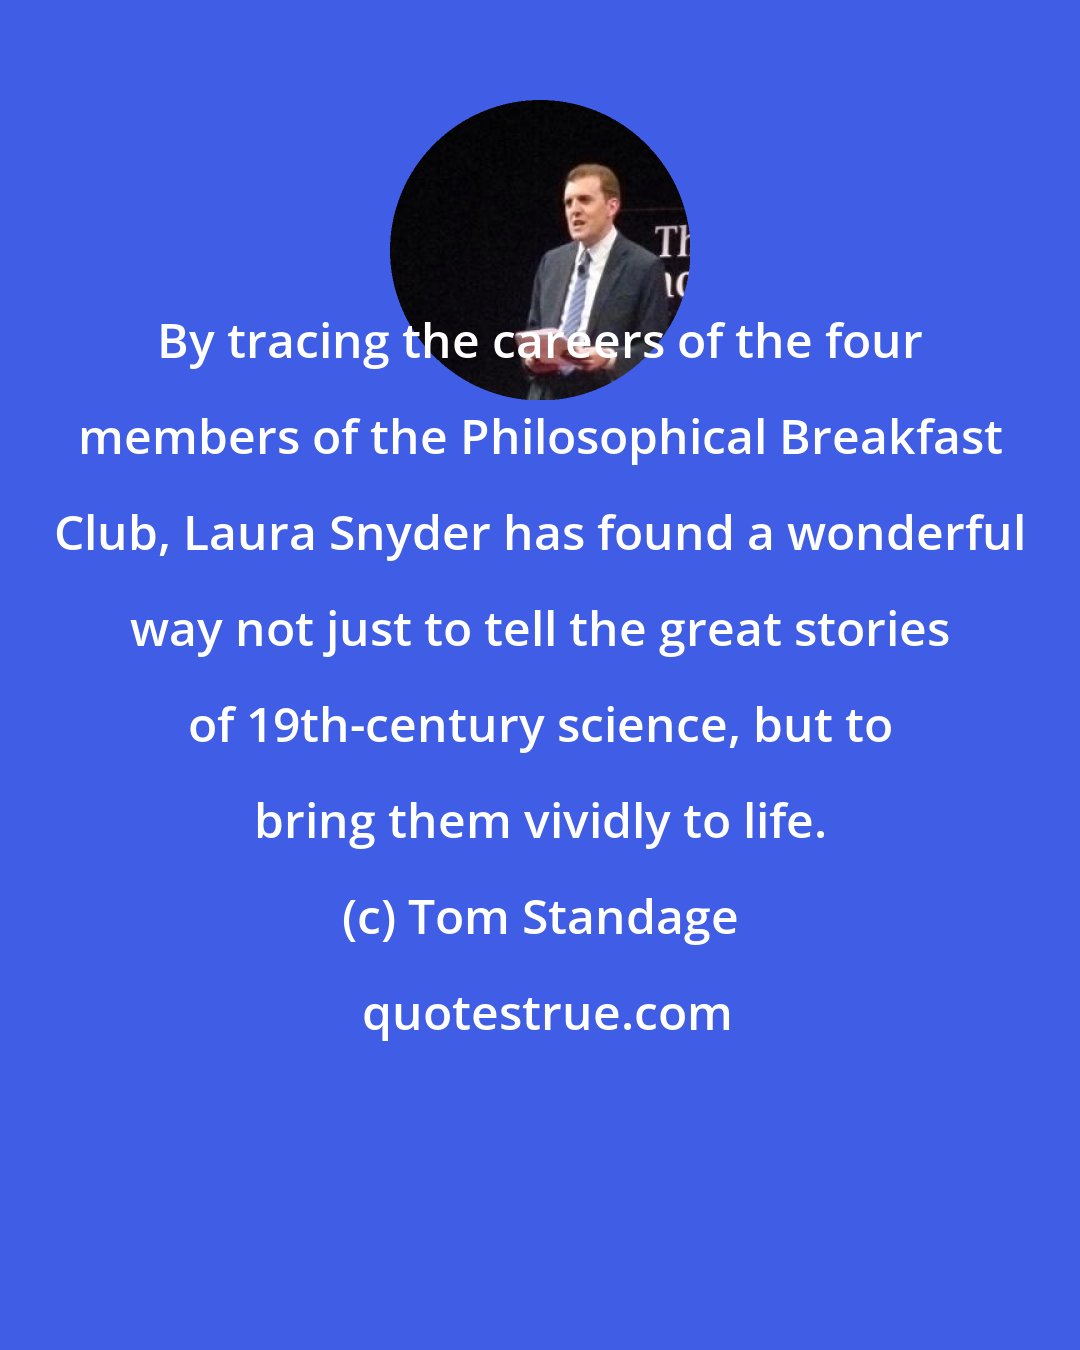 Tom Standage: By tracing the careers of the four members of the Philosophical Breakfast Club, Laura Snyder has found a wonderful way not just to tell the great stories of 19th-century science, but to bring them vividly to life.